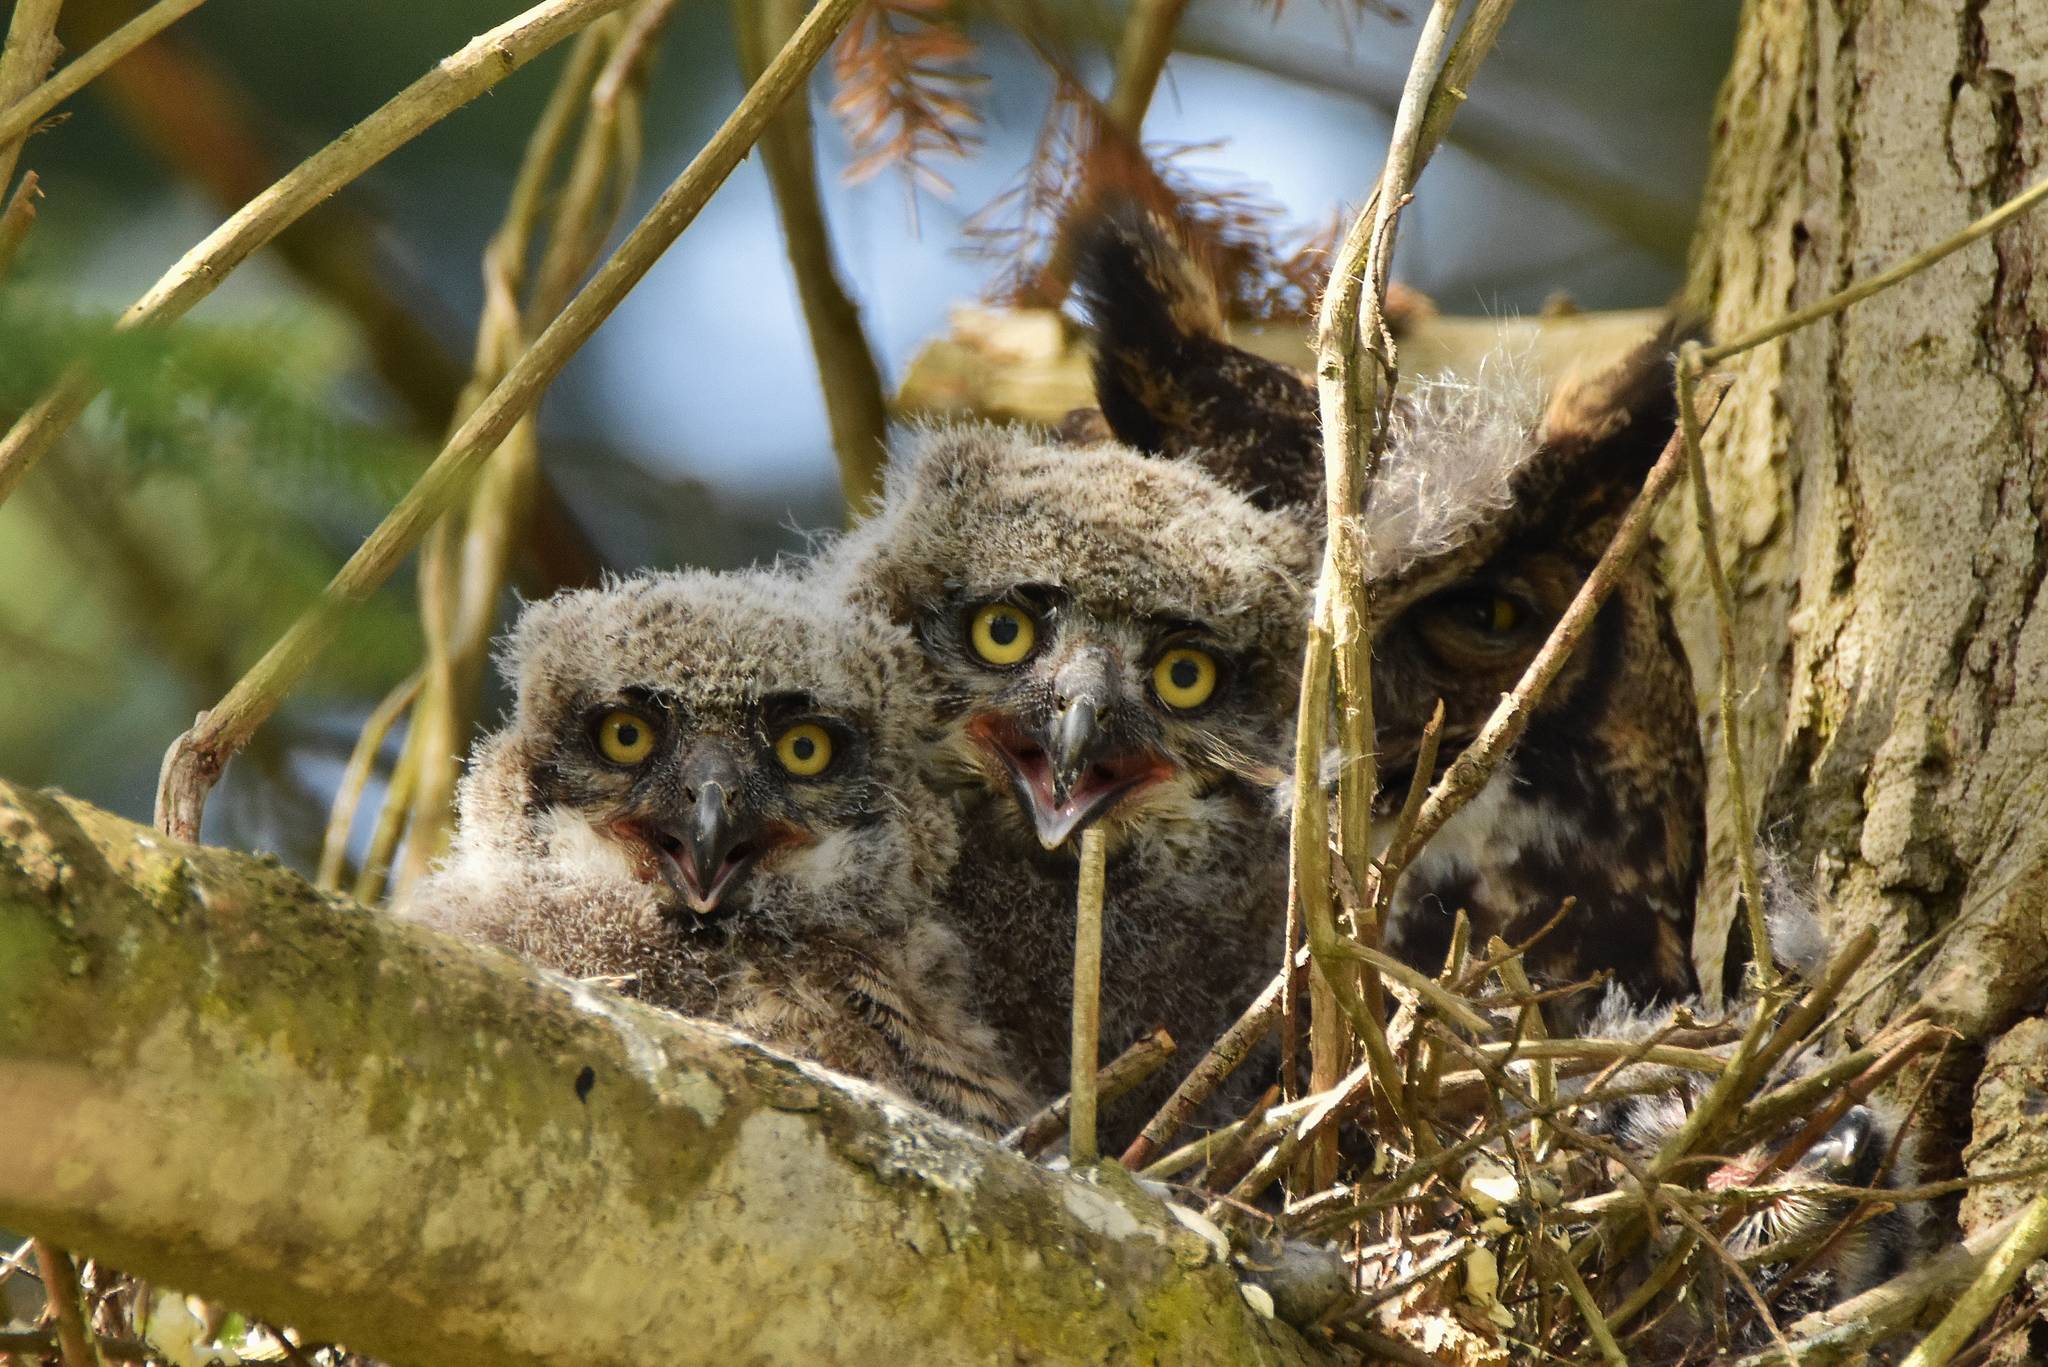 Photo by Cara Hefflinger
After Coupeville resident Geri Nelson saw these two Great Horned owlets and their mother, she posted to social media to see if there was any local photography interest. Cara Hefflinger came to the tree, camera in hand.